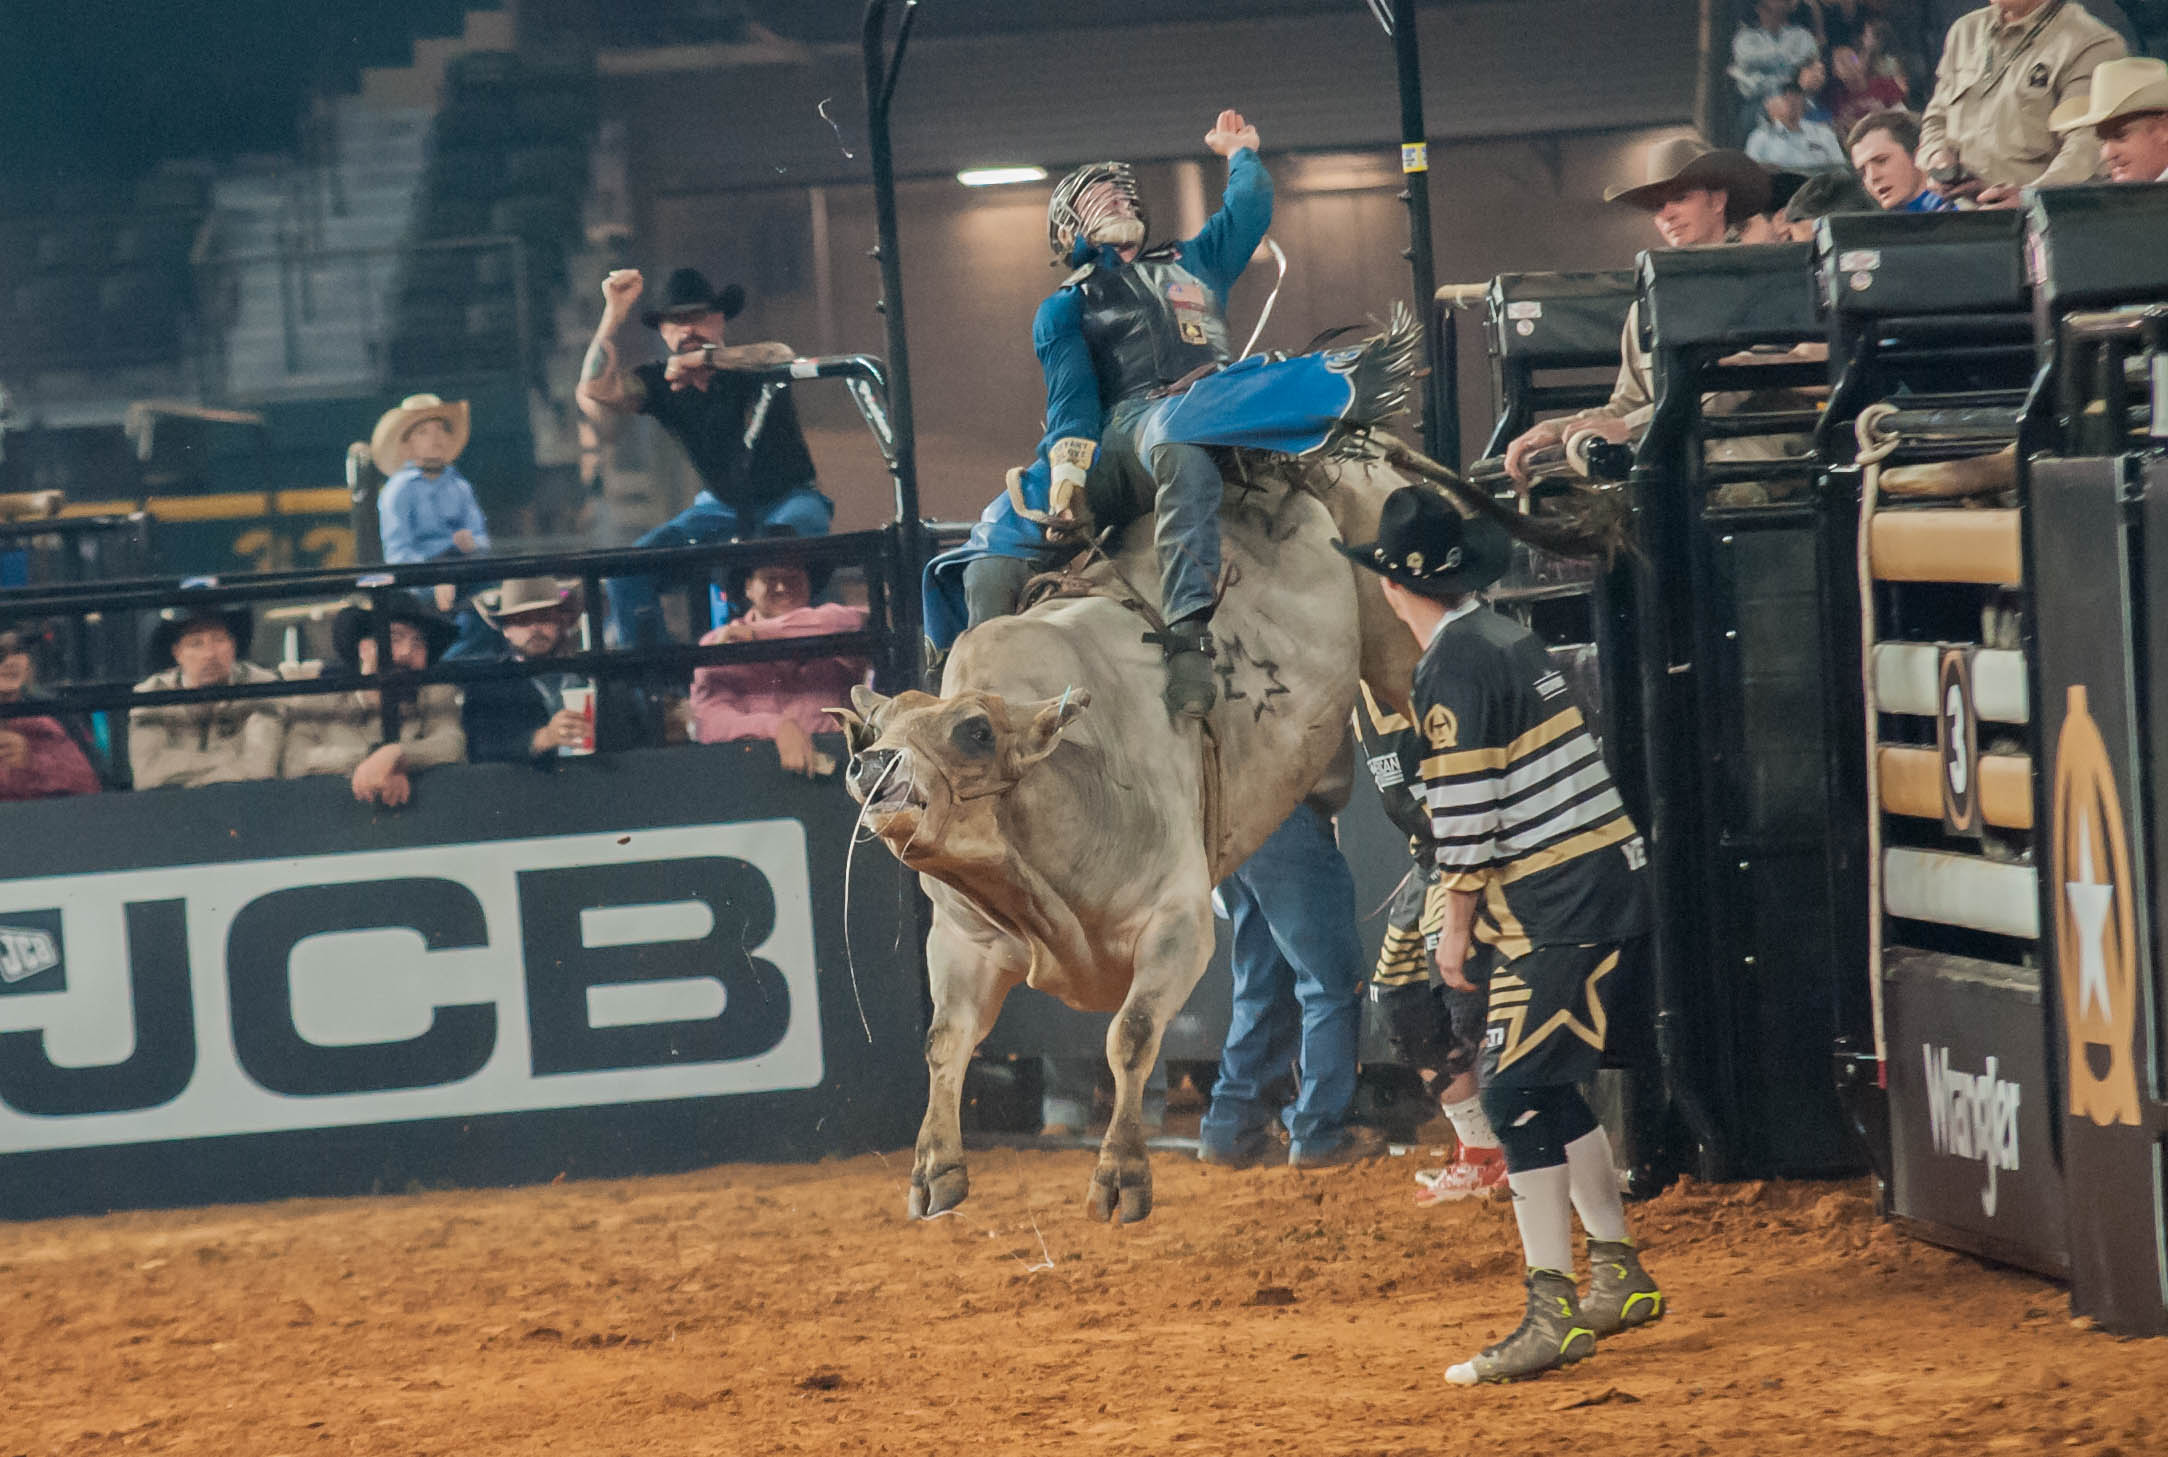 The American Rodeo Photos